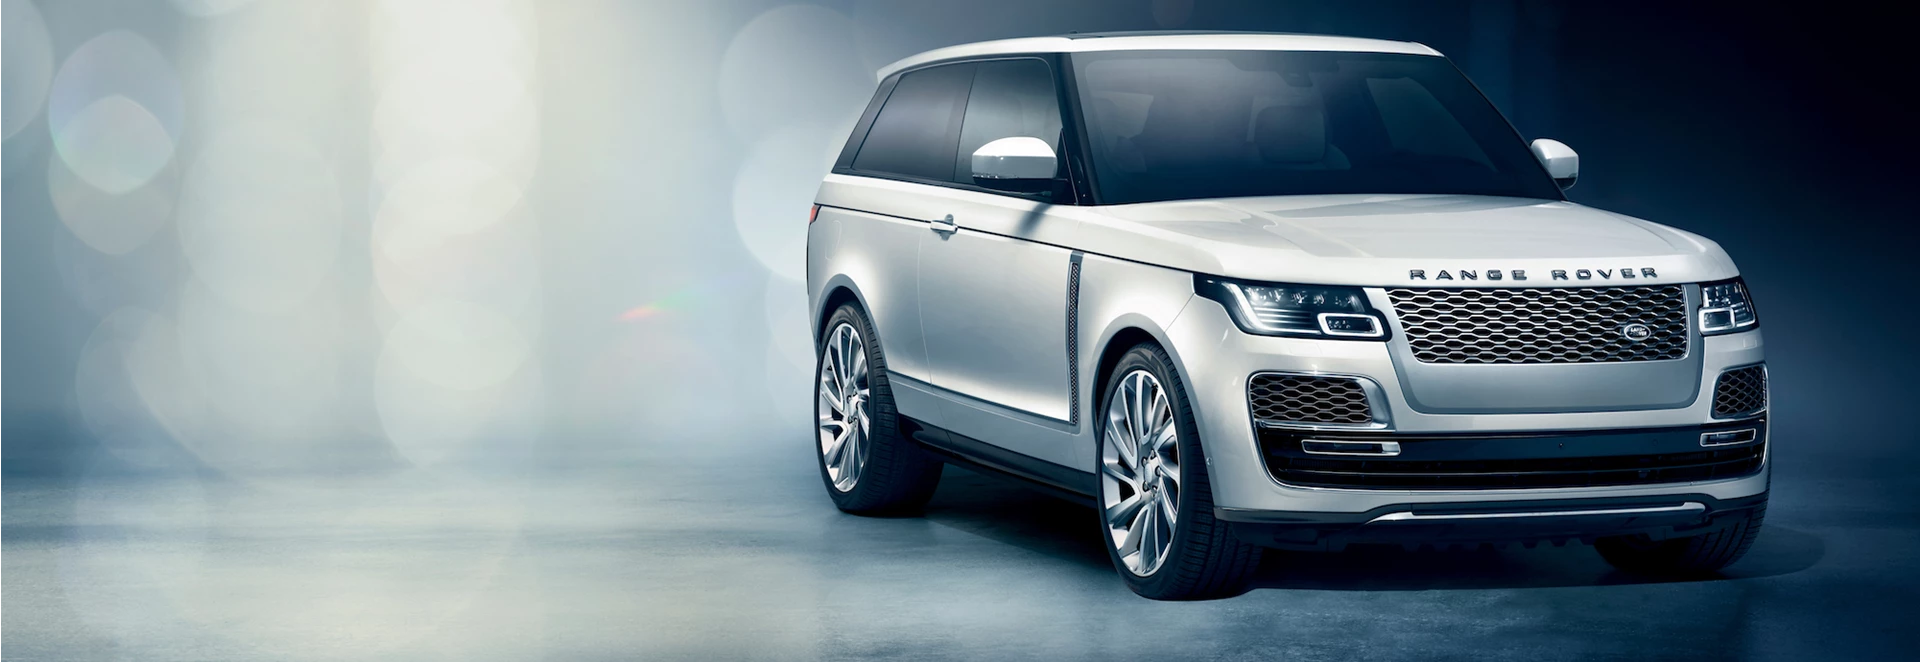 Limited-edition Land Rover Range Rover SV Coupé revealed